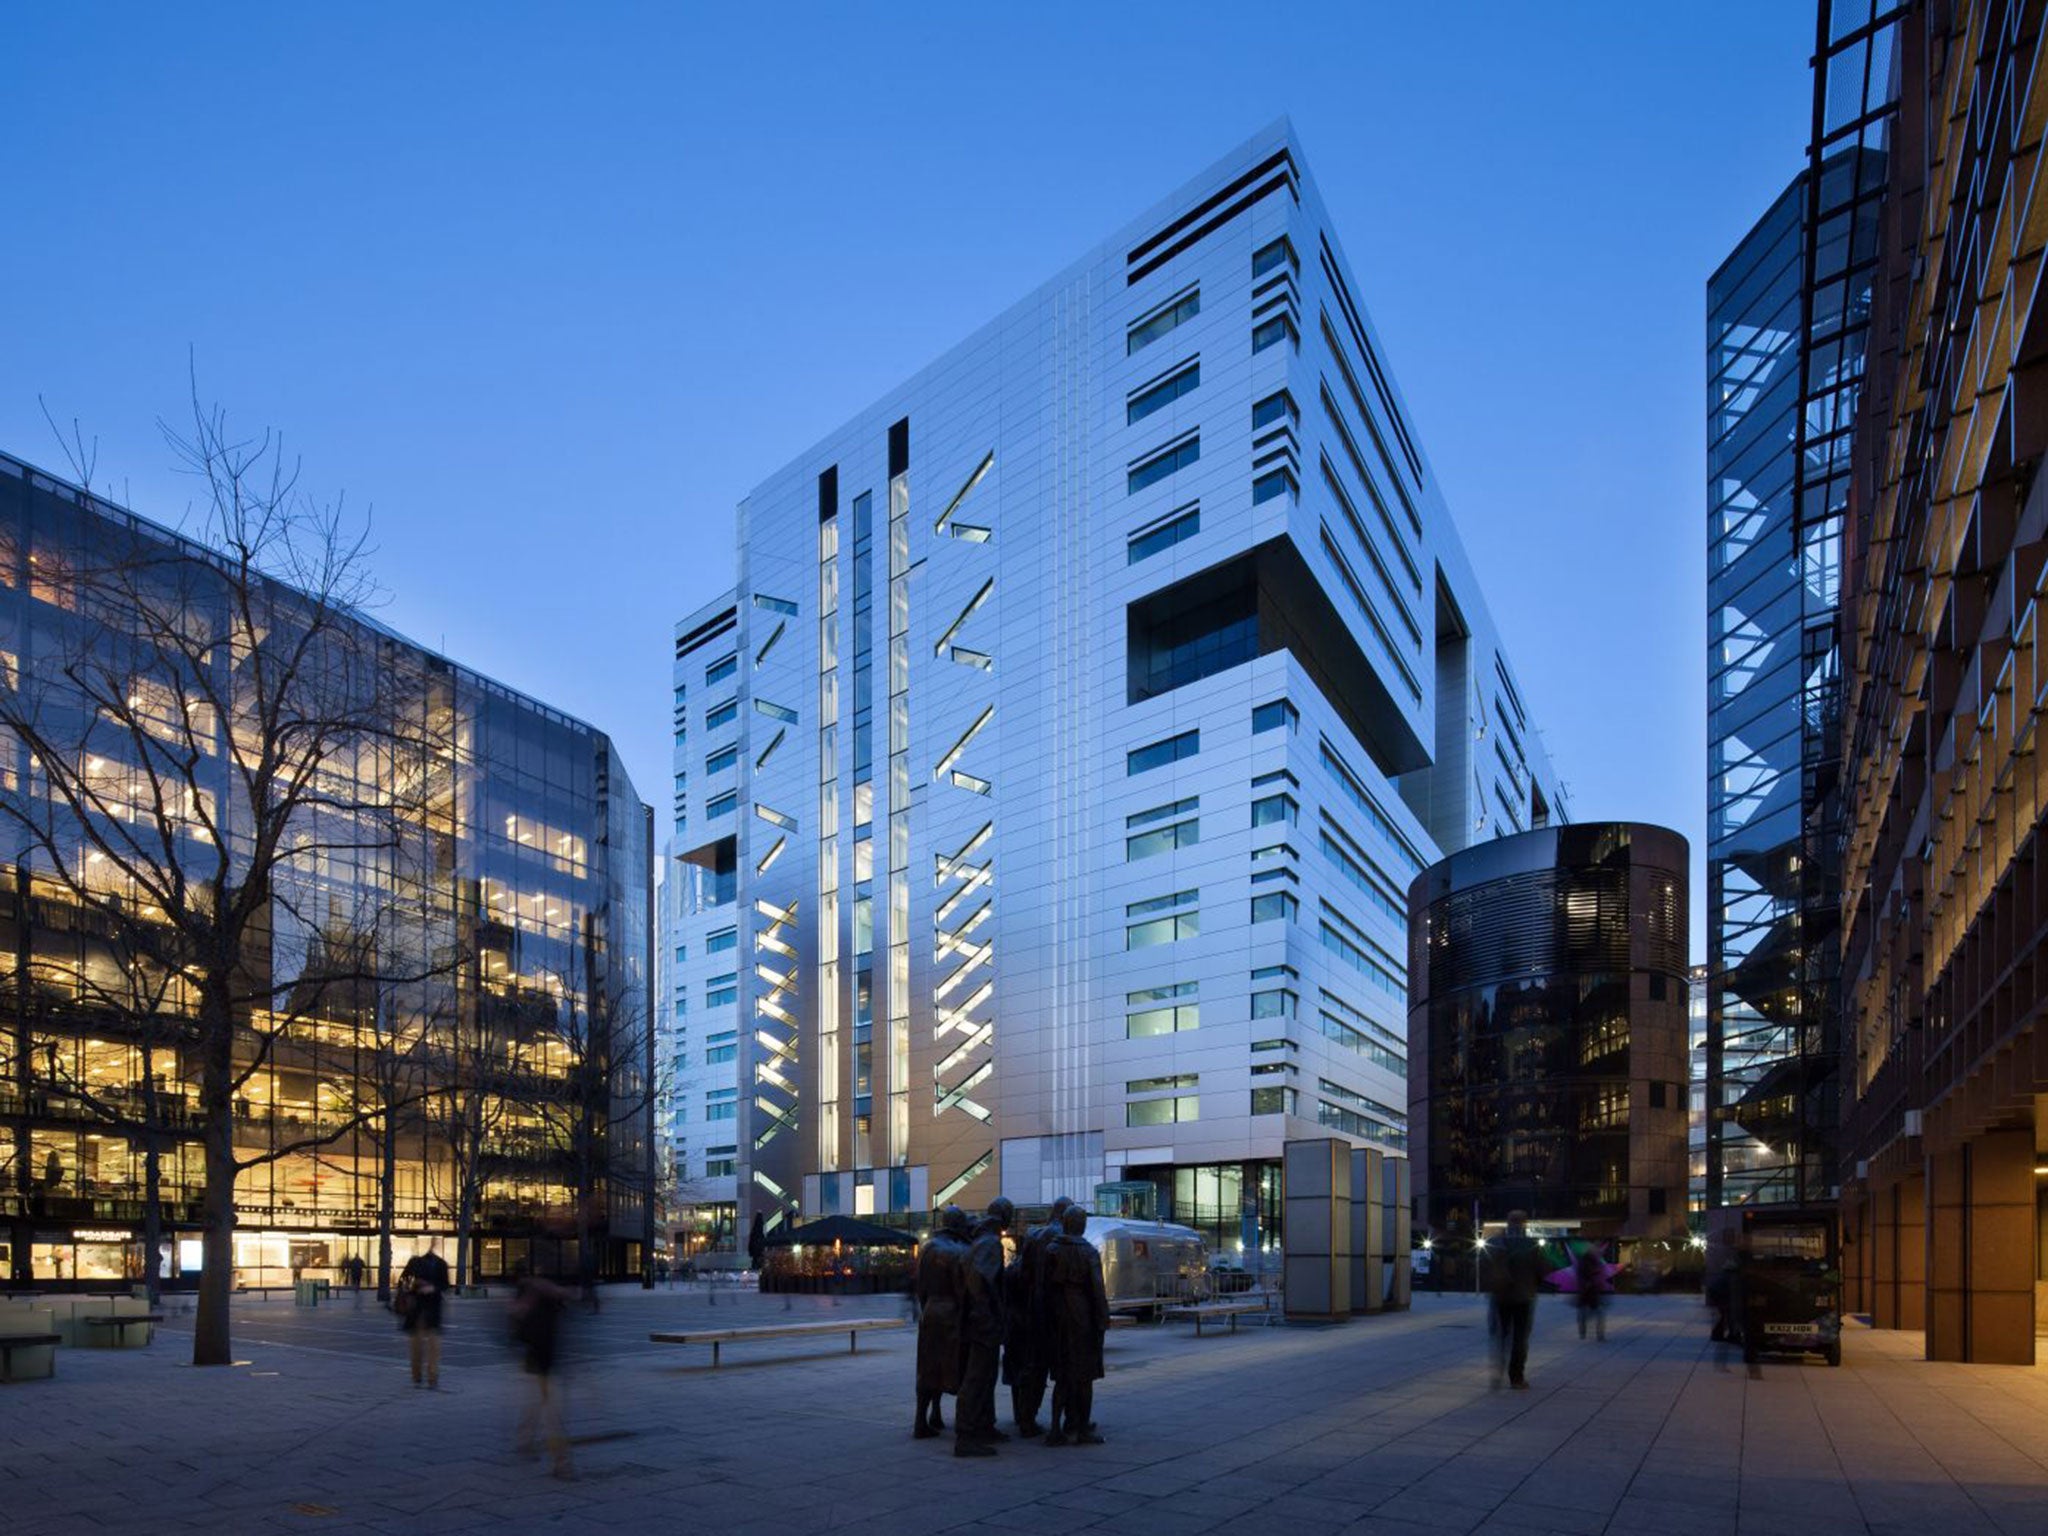 The 12-storey offices at 5 Broadgate in the City of London. The 67,000 square metre space will house 5,400 UBS staff